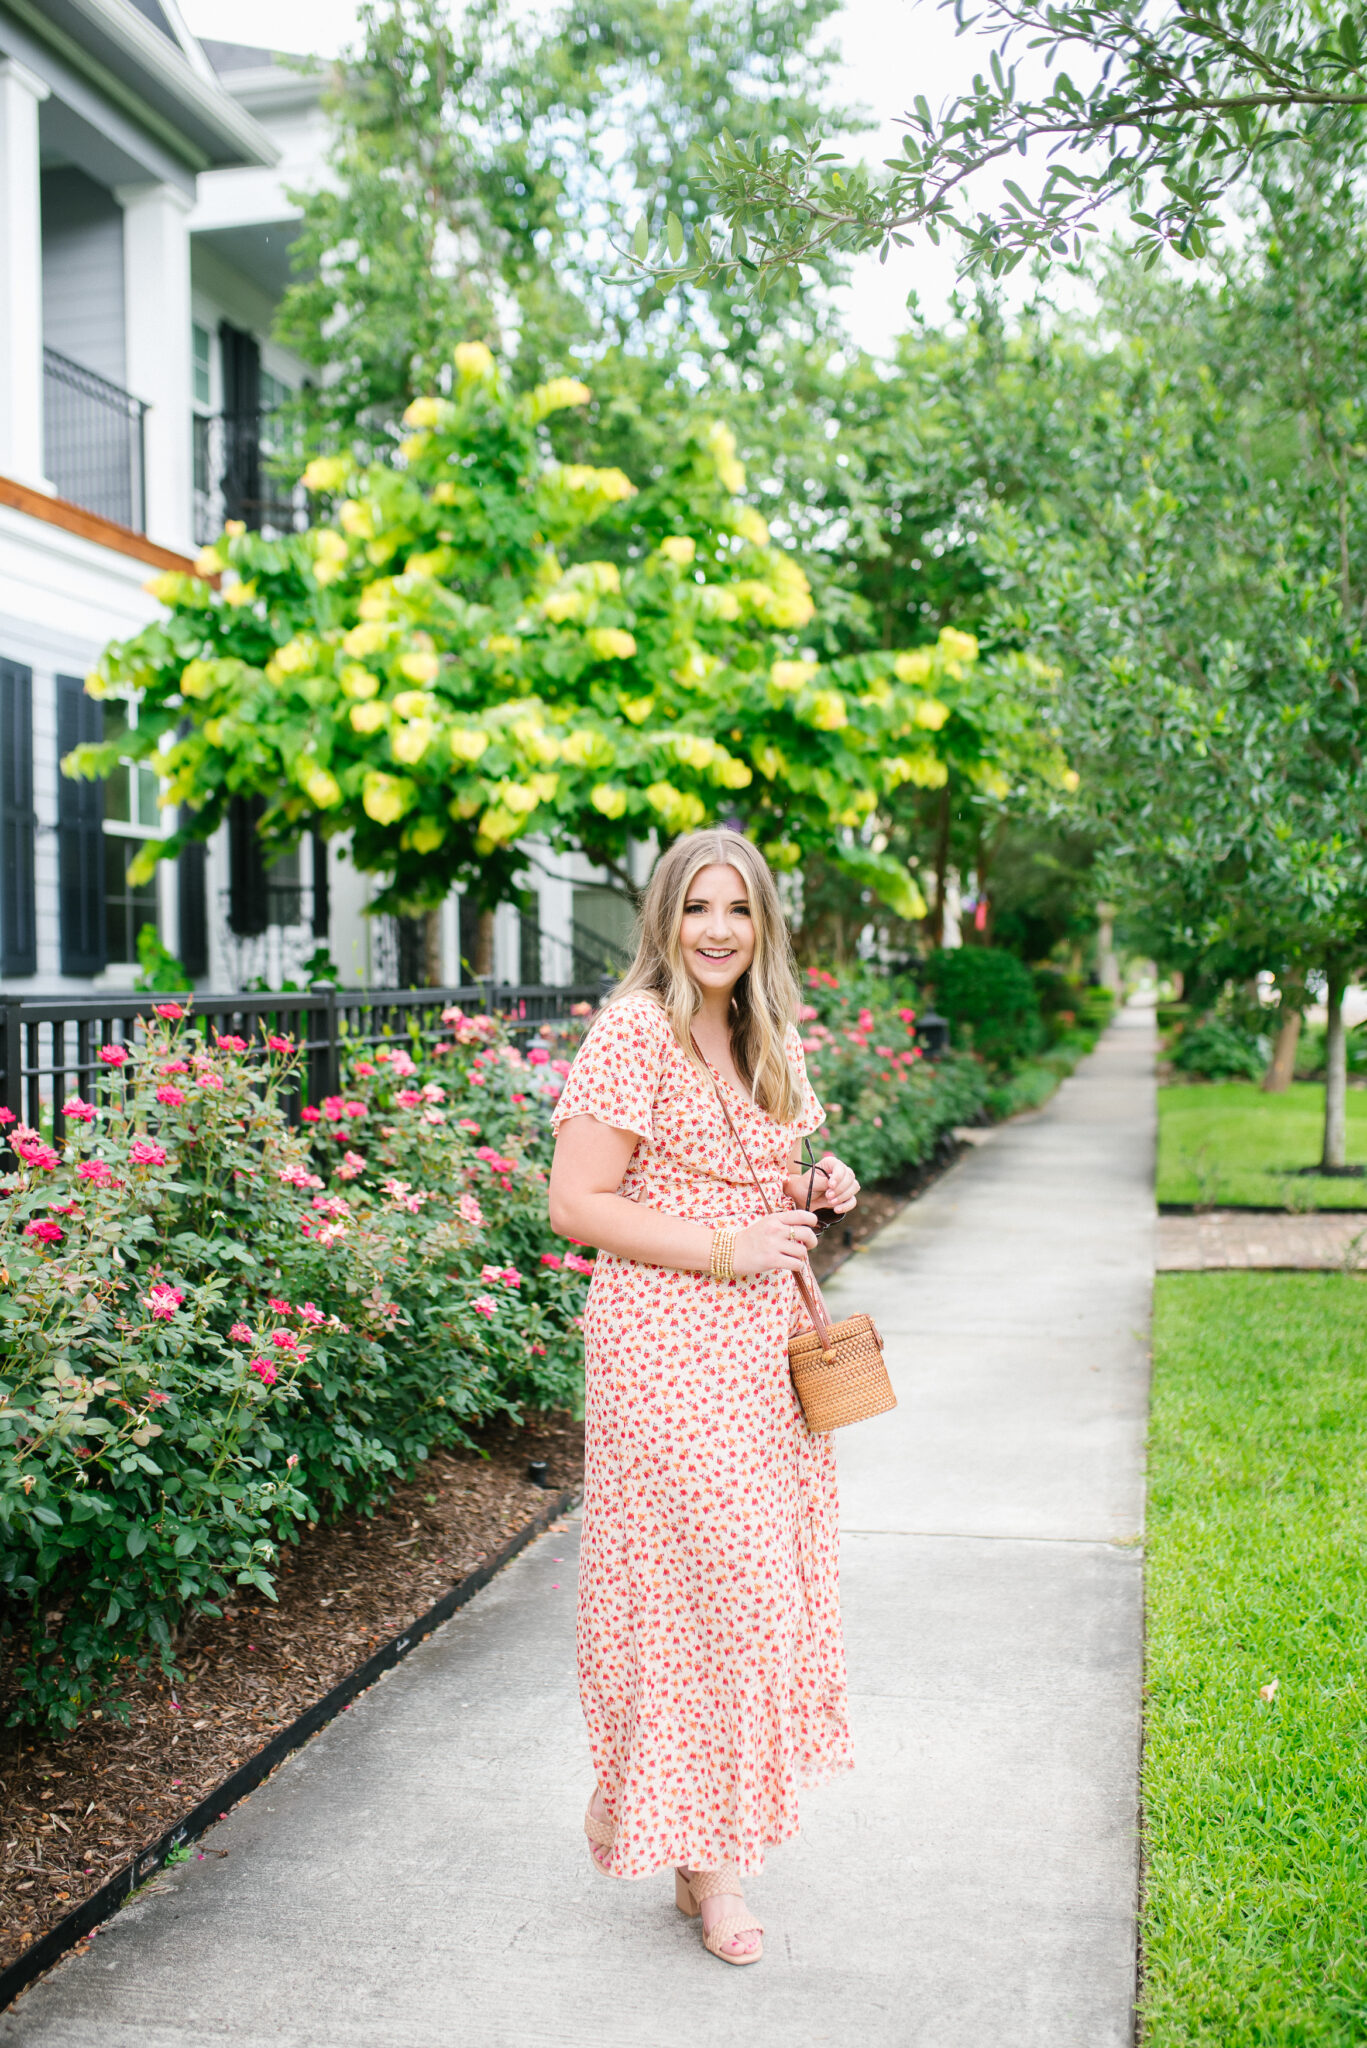 Amazon Wrap Dress for Summer - Thrifty Pineapple